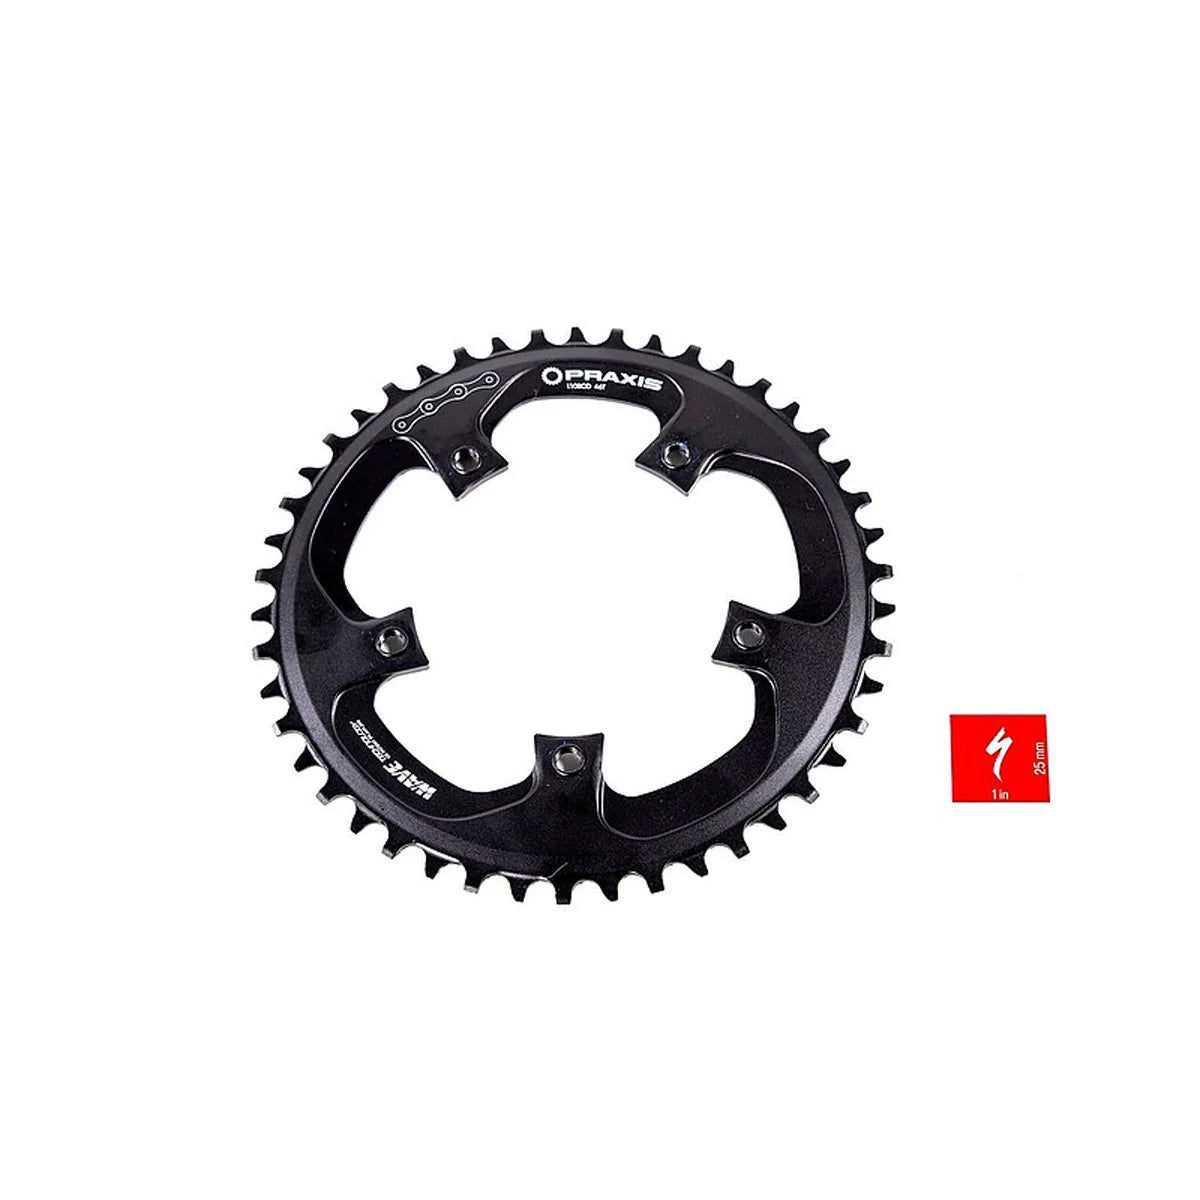 CHR CHAINRING, SL SYSTEM, 46T, 49CL, 110BCD